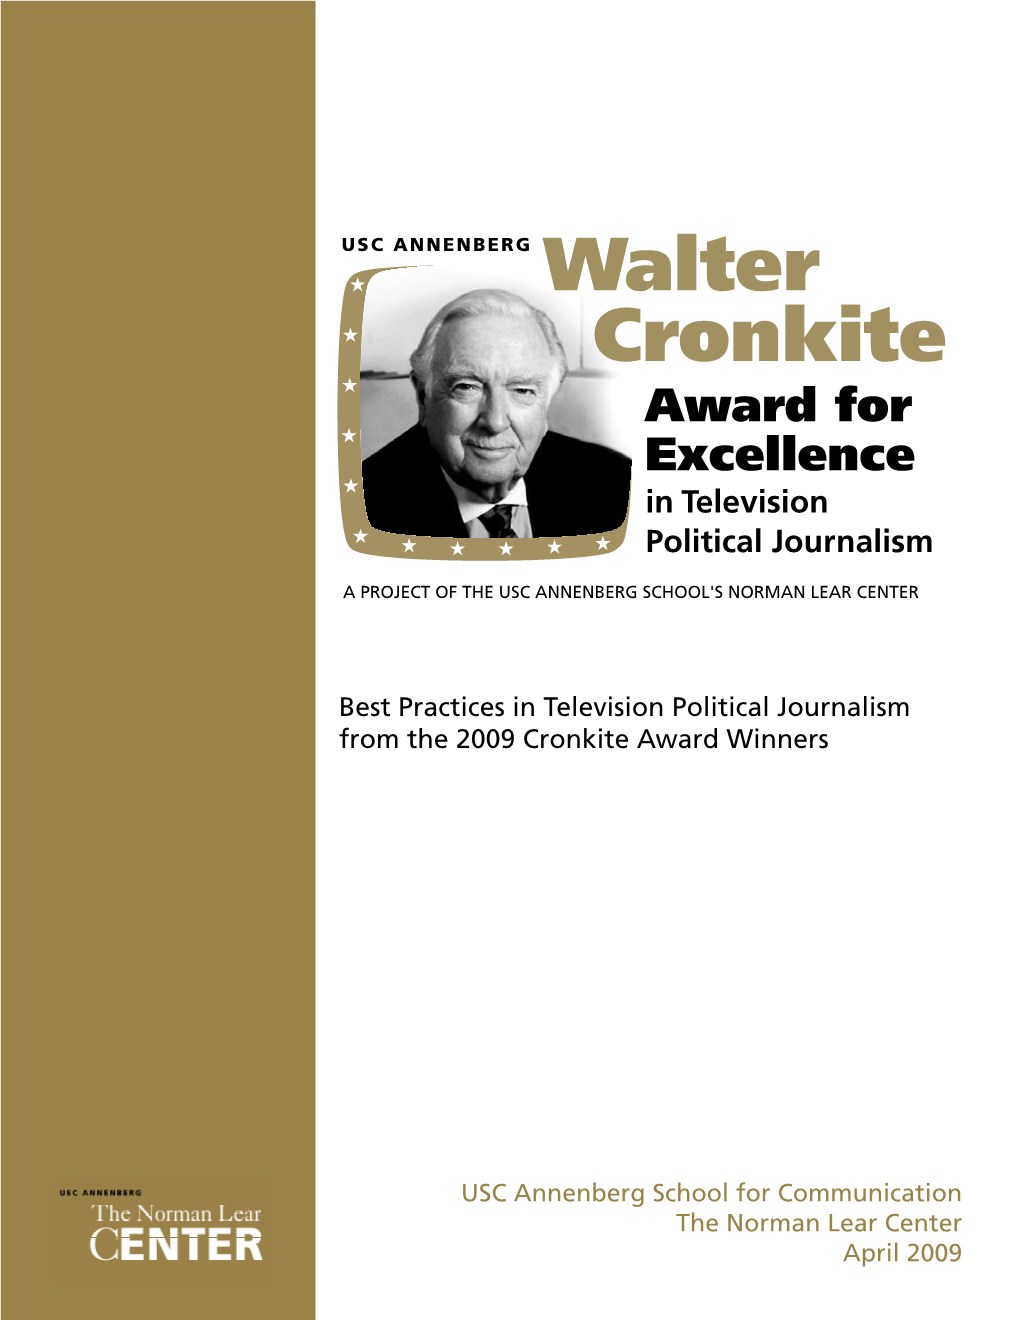 Best Practices in Television Political Journalism from the 2009 Cronkite Award Winners